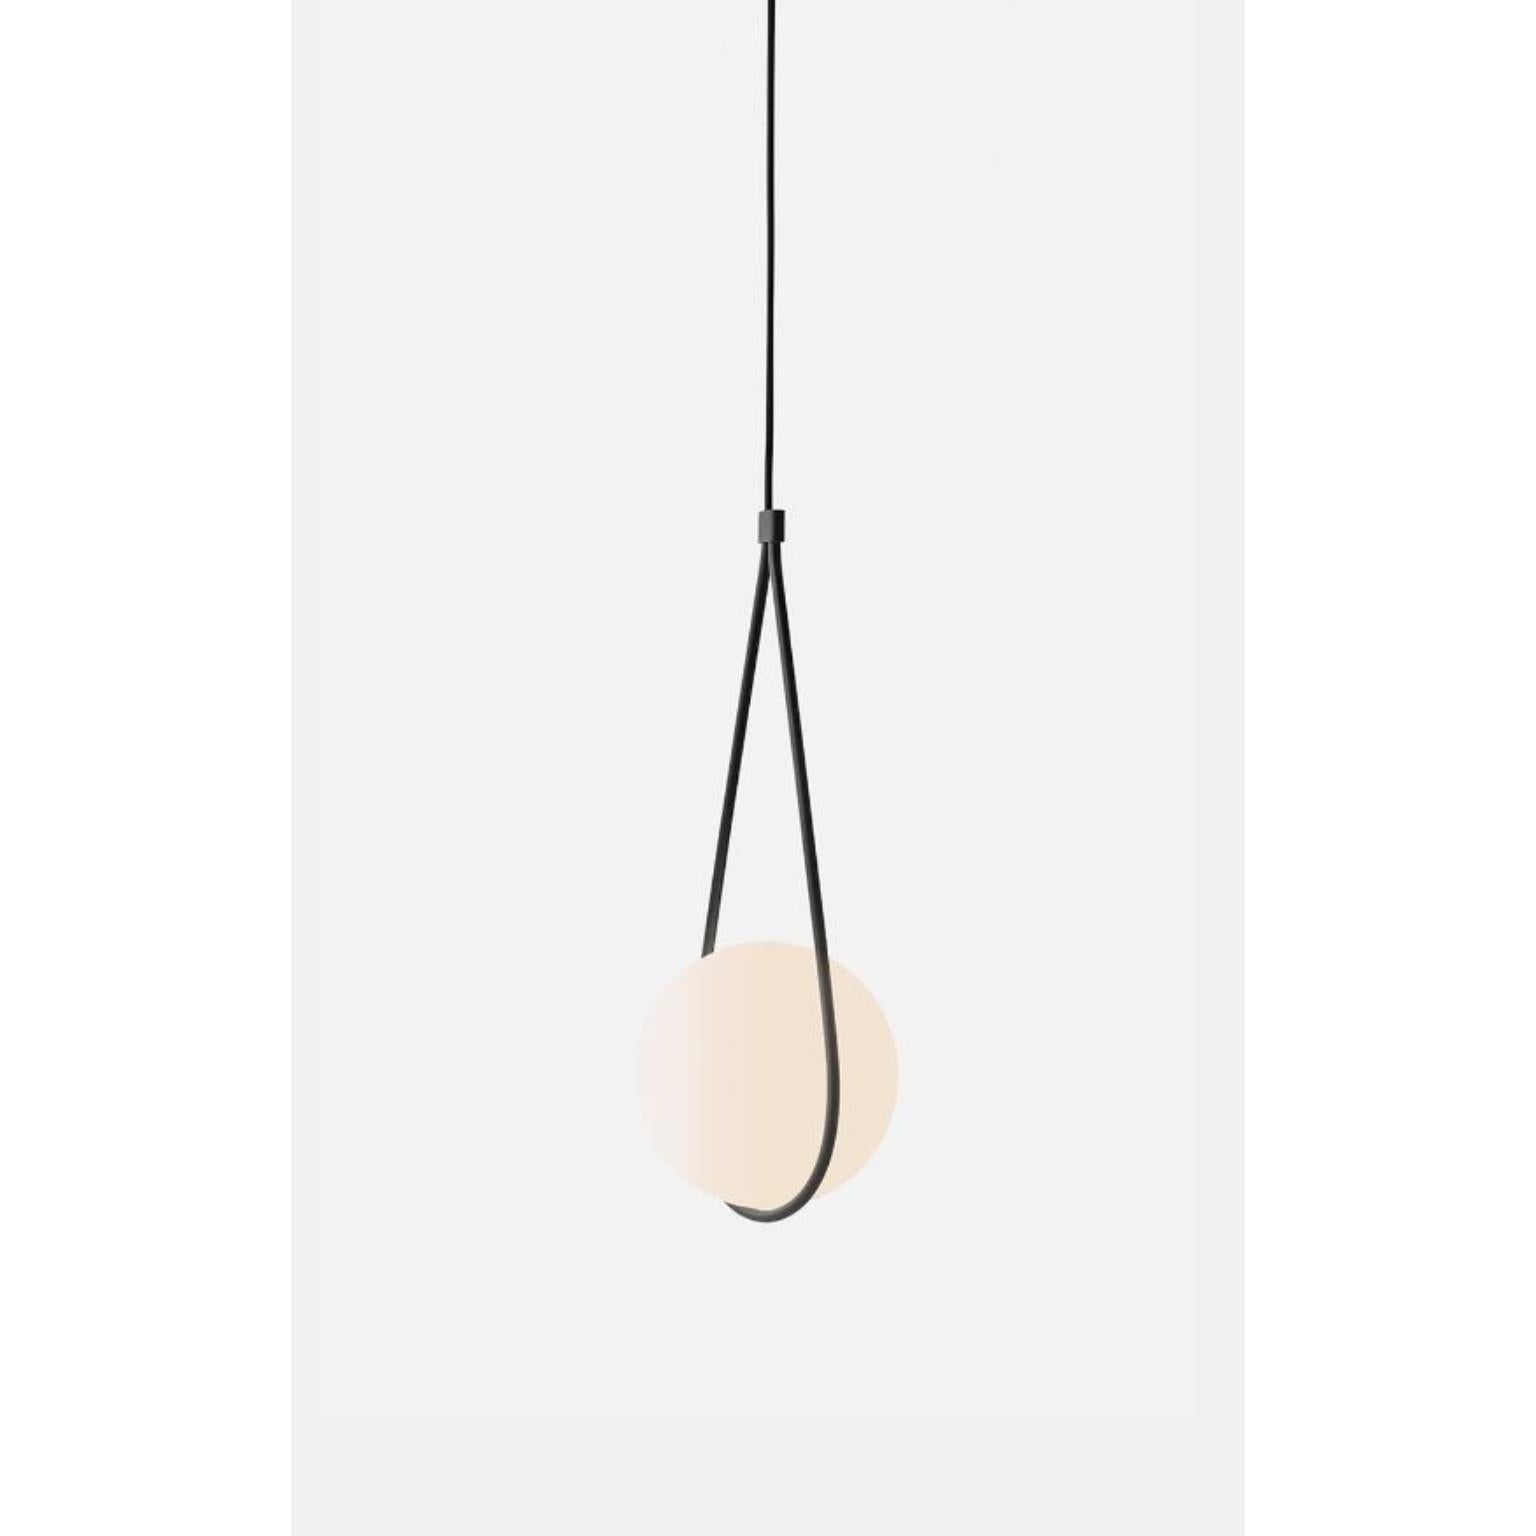 Black Corda Pendant Lamp by Wentz
Dimensions: D 20 x W 22 x H 55 cm
Materials: Aluminum, Blown Glass.


WEIGHT: 1,2kg / 2,6 lbs
Colors: Black, White
LIGHT SOURCE: Built-in LED. 150lm. 2700K. 80 CRI.
DIMMING ELV @ 120VAC.
VOLTAGE: 120-277V -